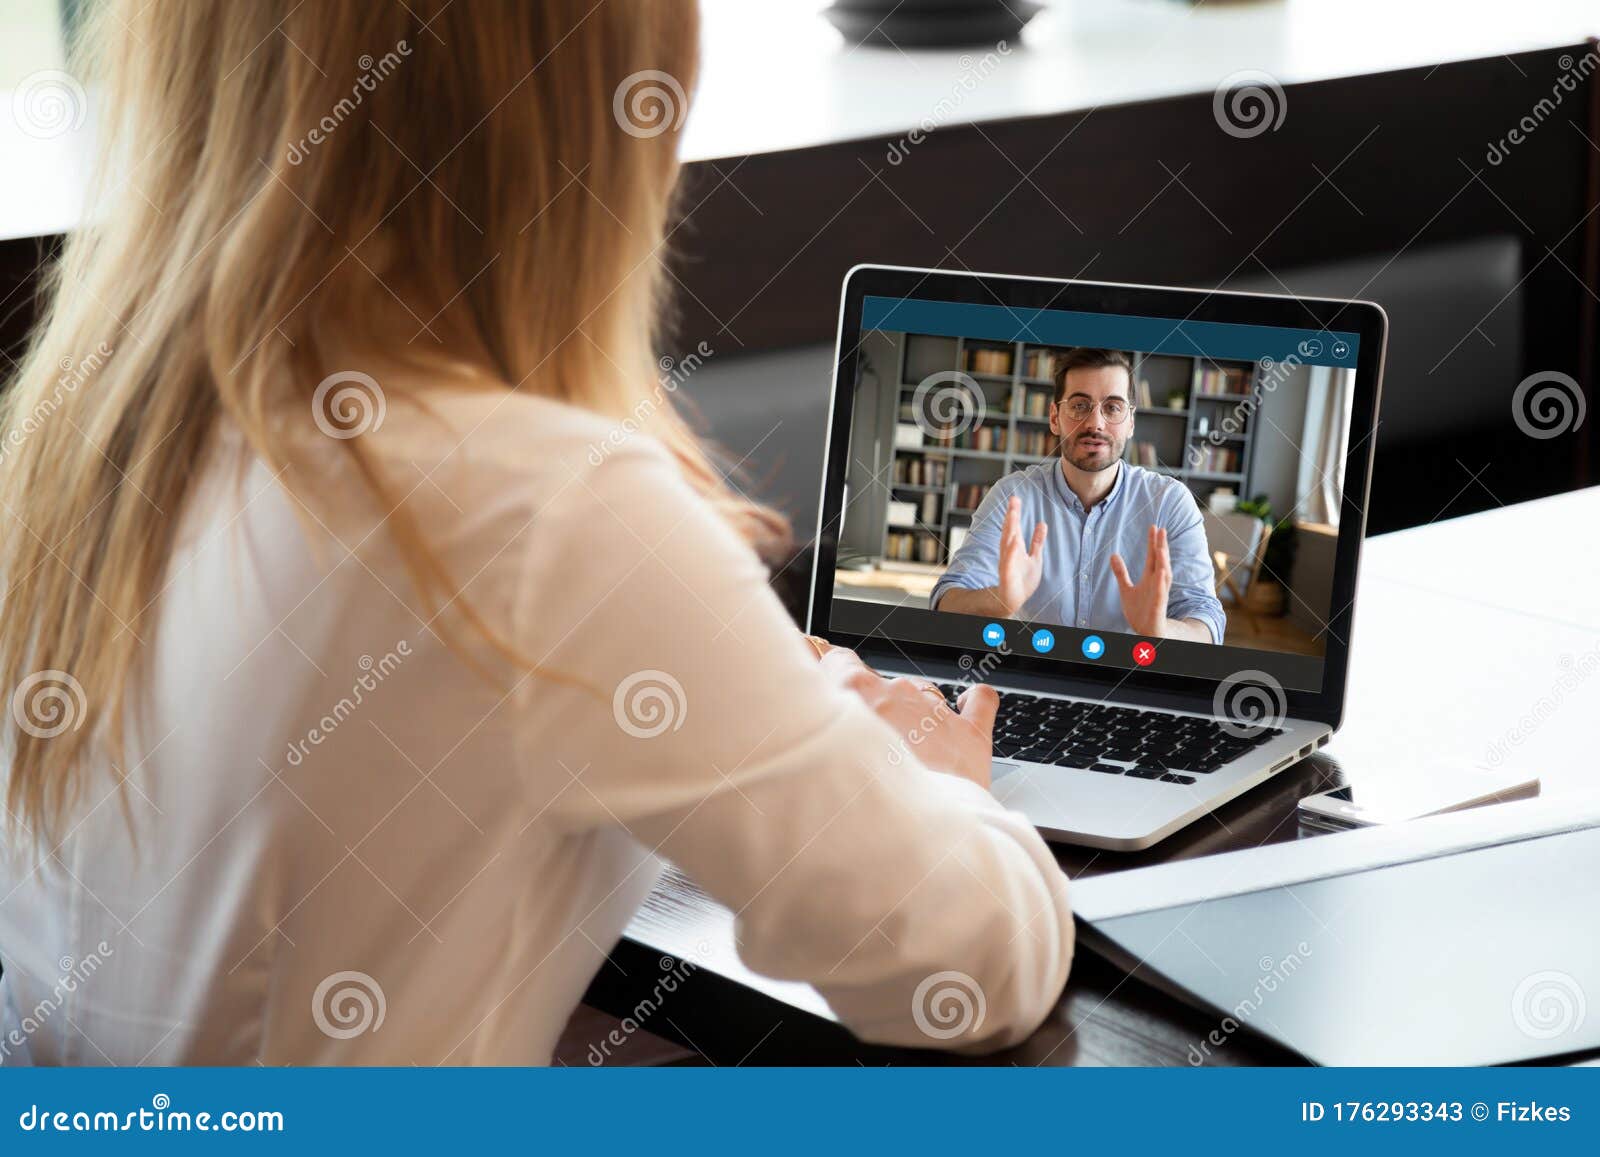 employer listen applicant during job interview using webcam and pc